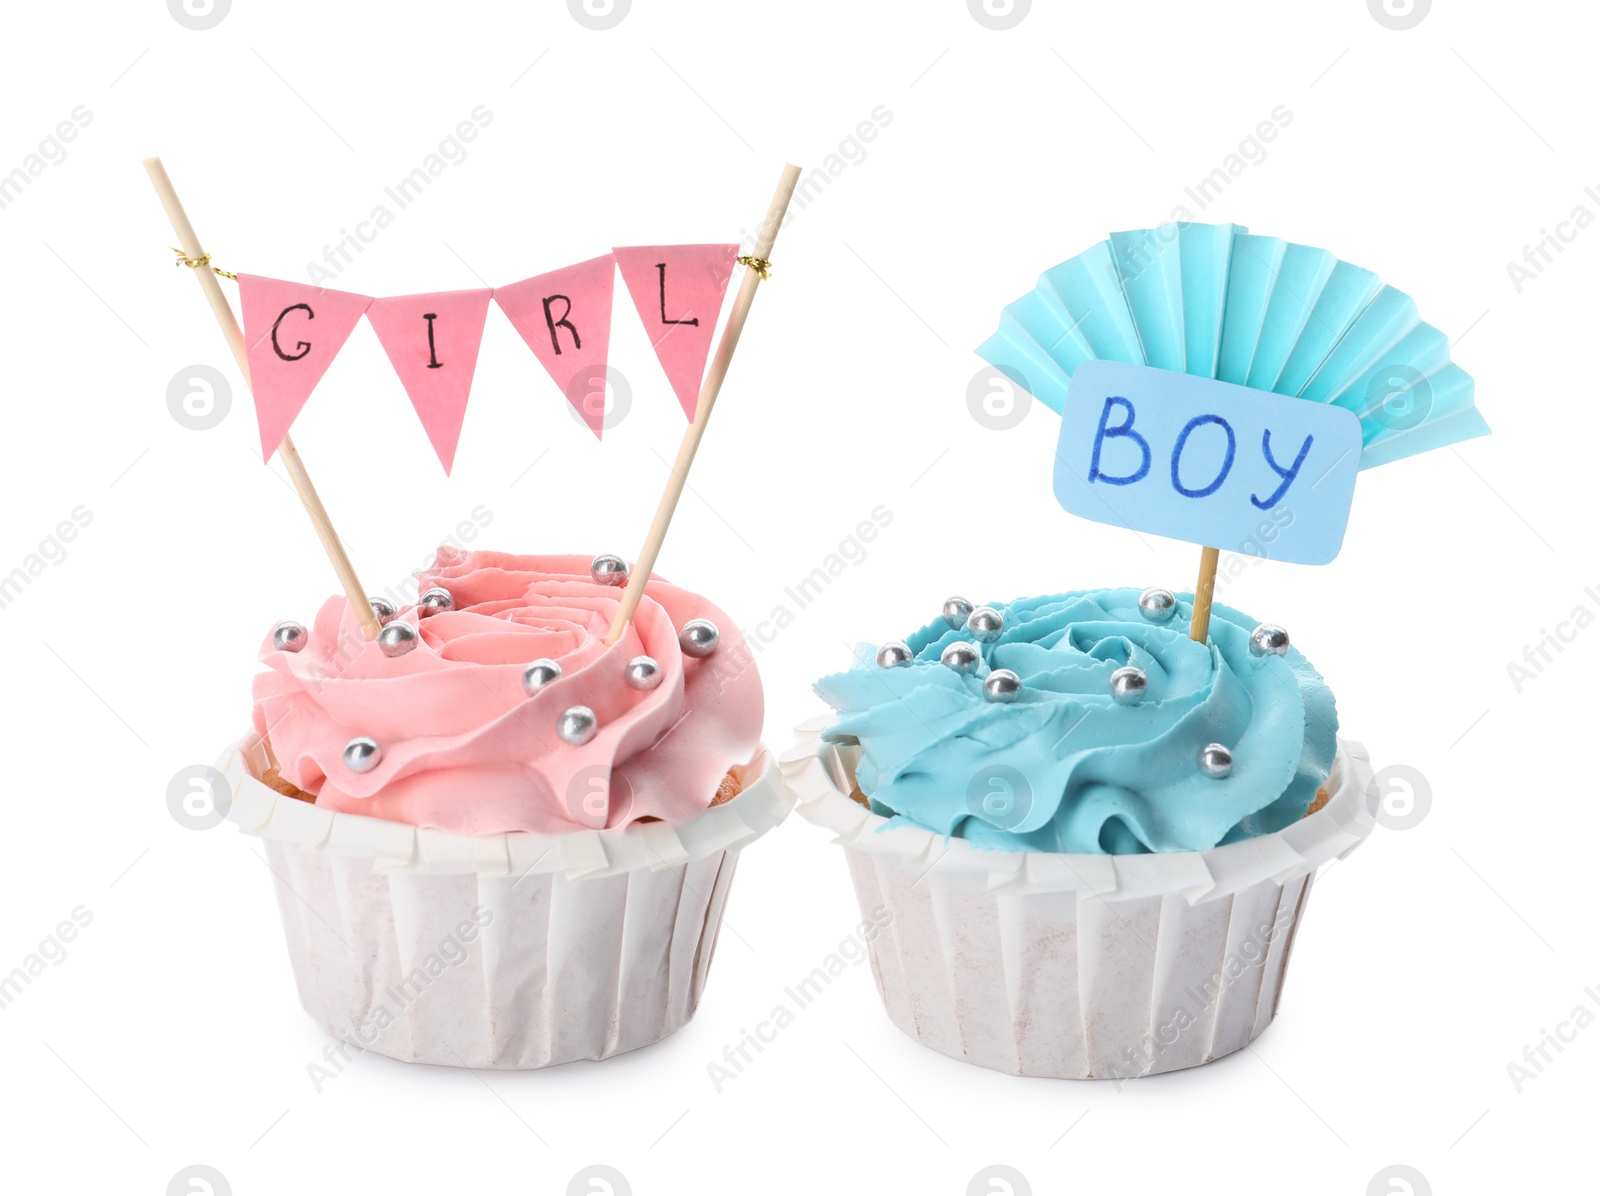 Photo of Baby shower cupcakes with Boy and Girl toppers on white background